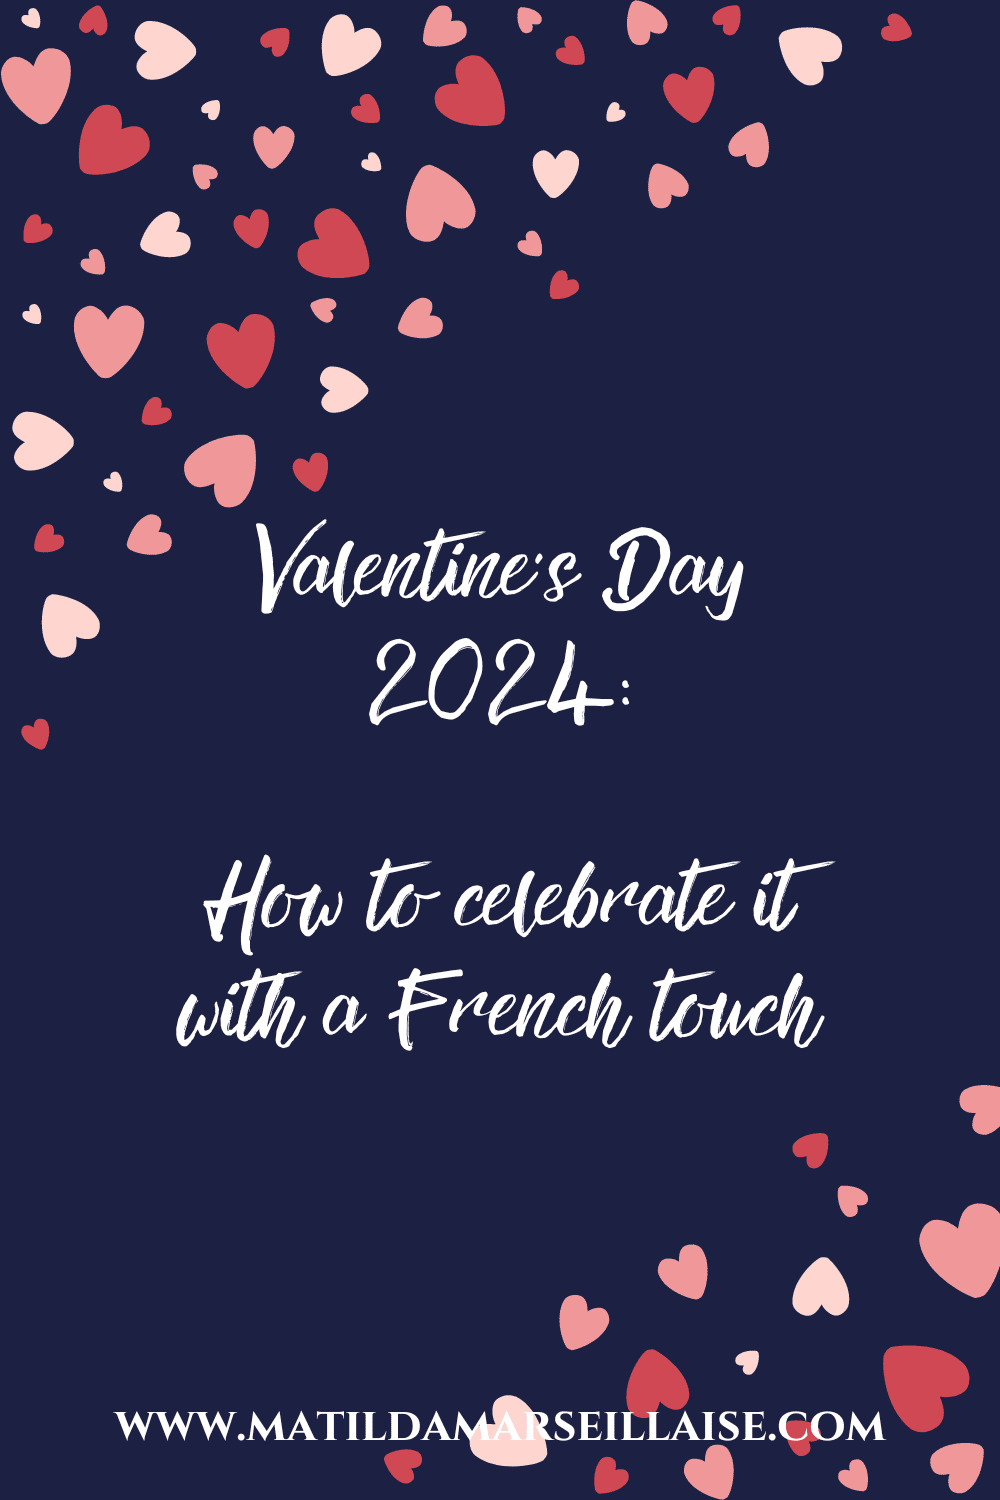 Celebrate Valentine’s Day 2024 with a French touch in Australia